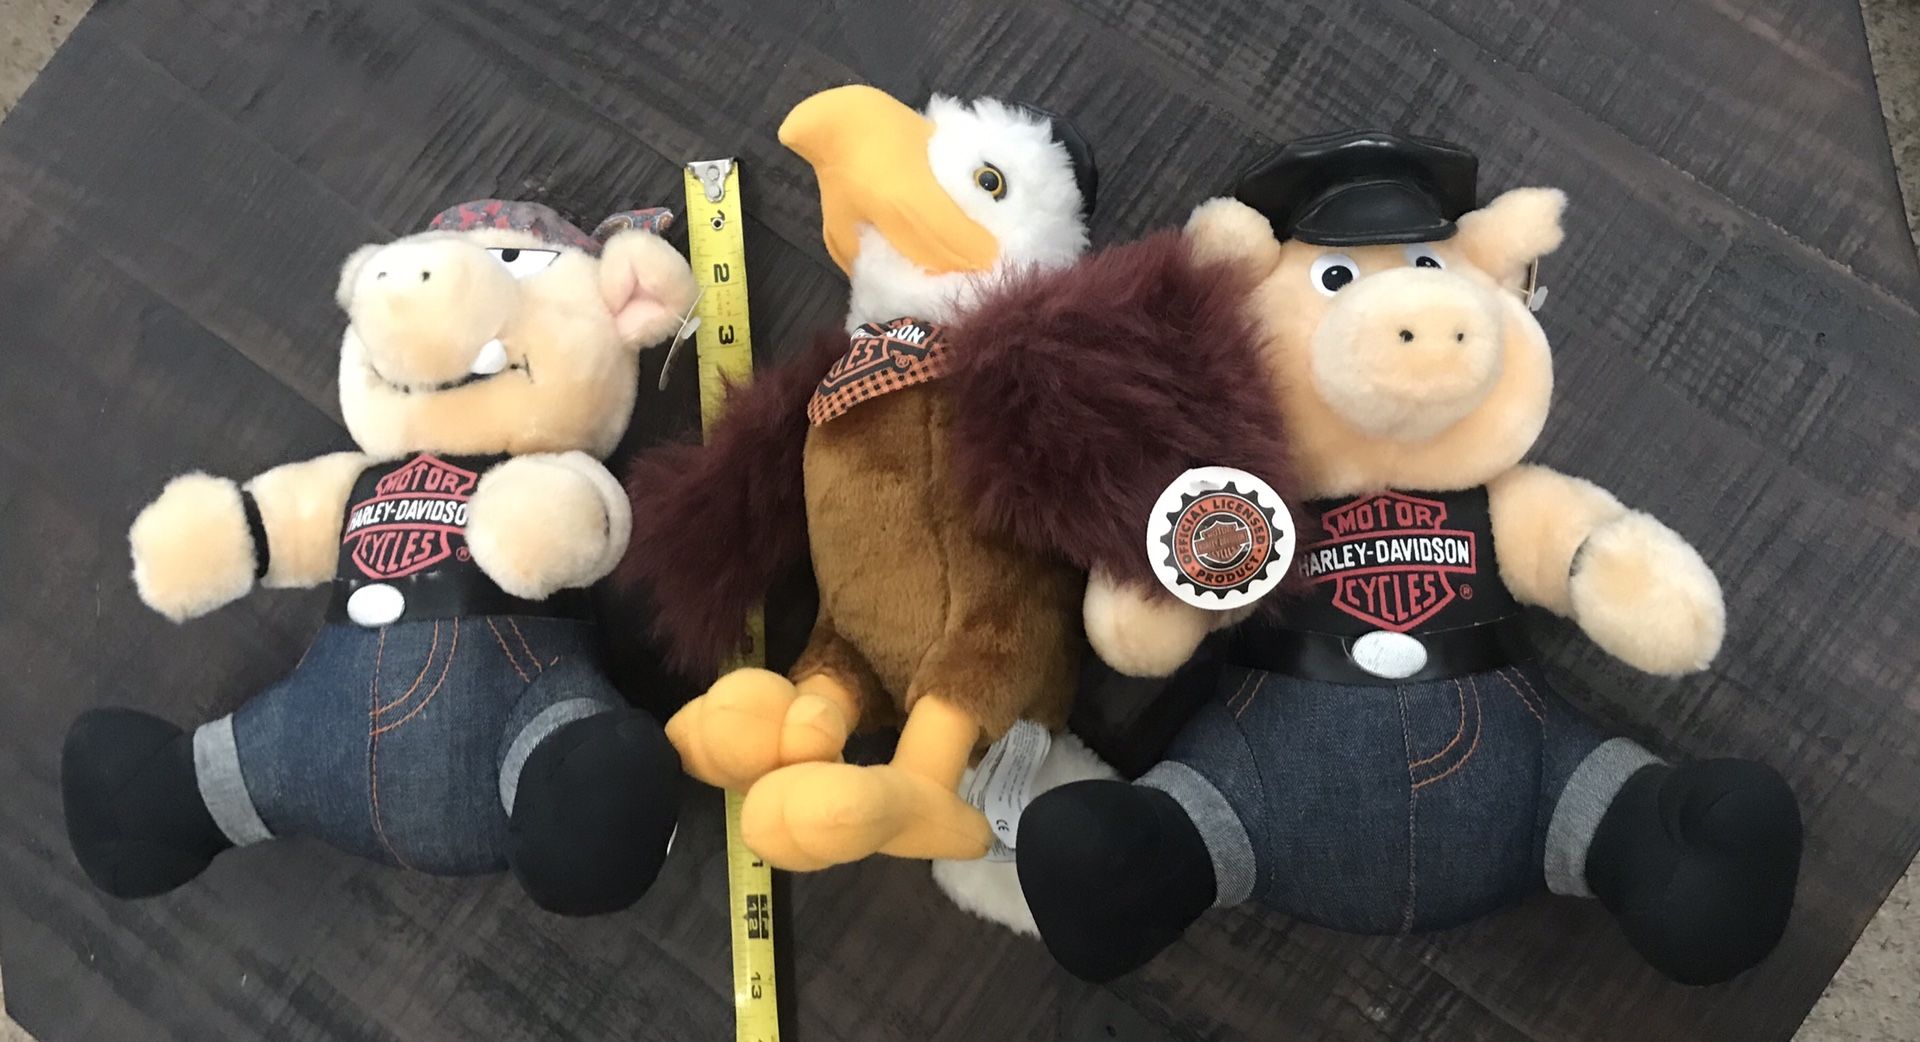 Harley Davidson Plush Toy $5 Each or All for $12